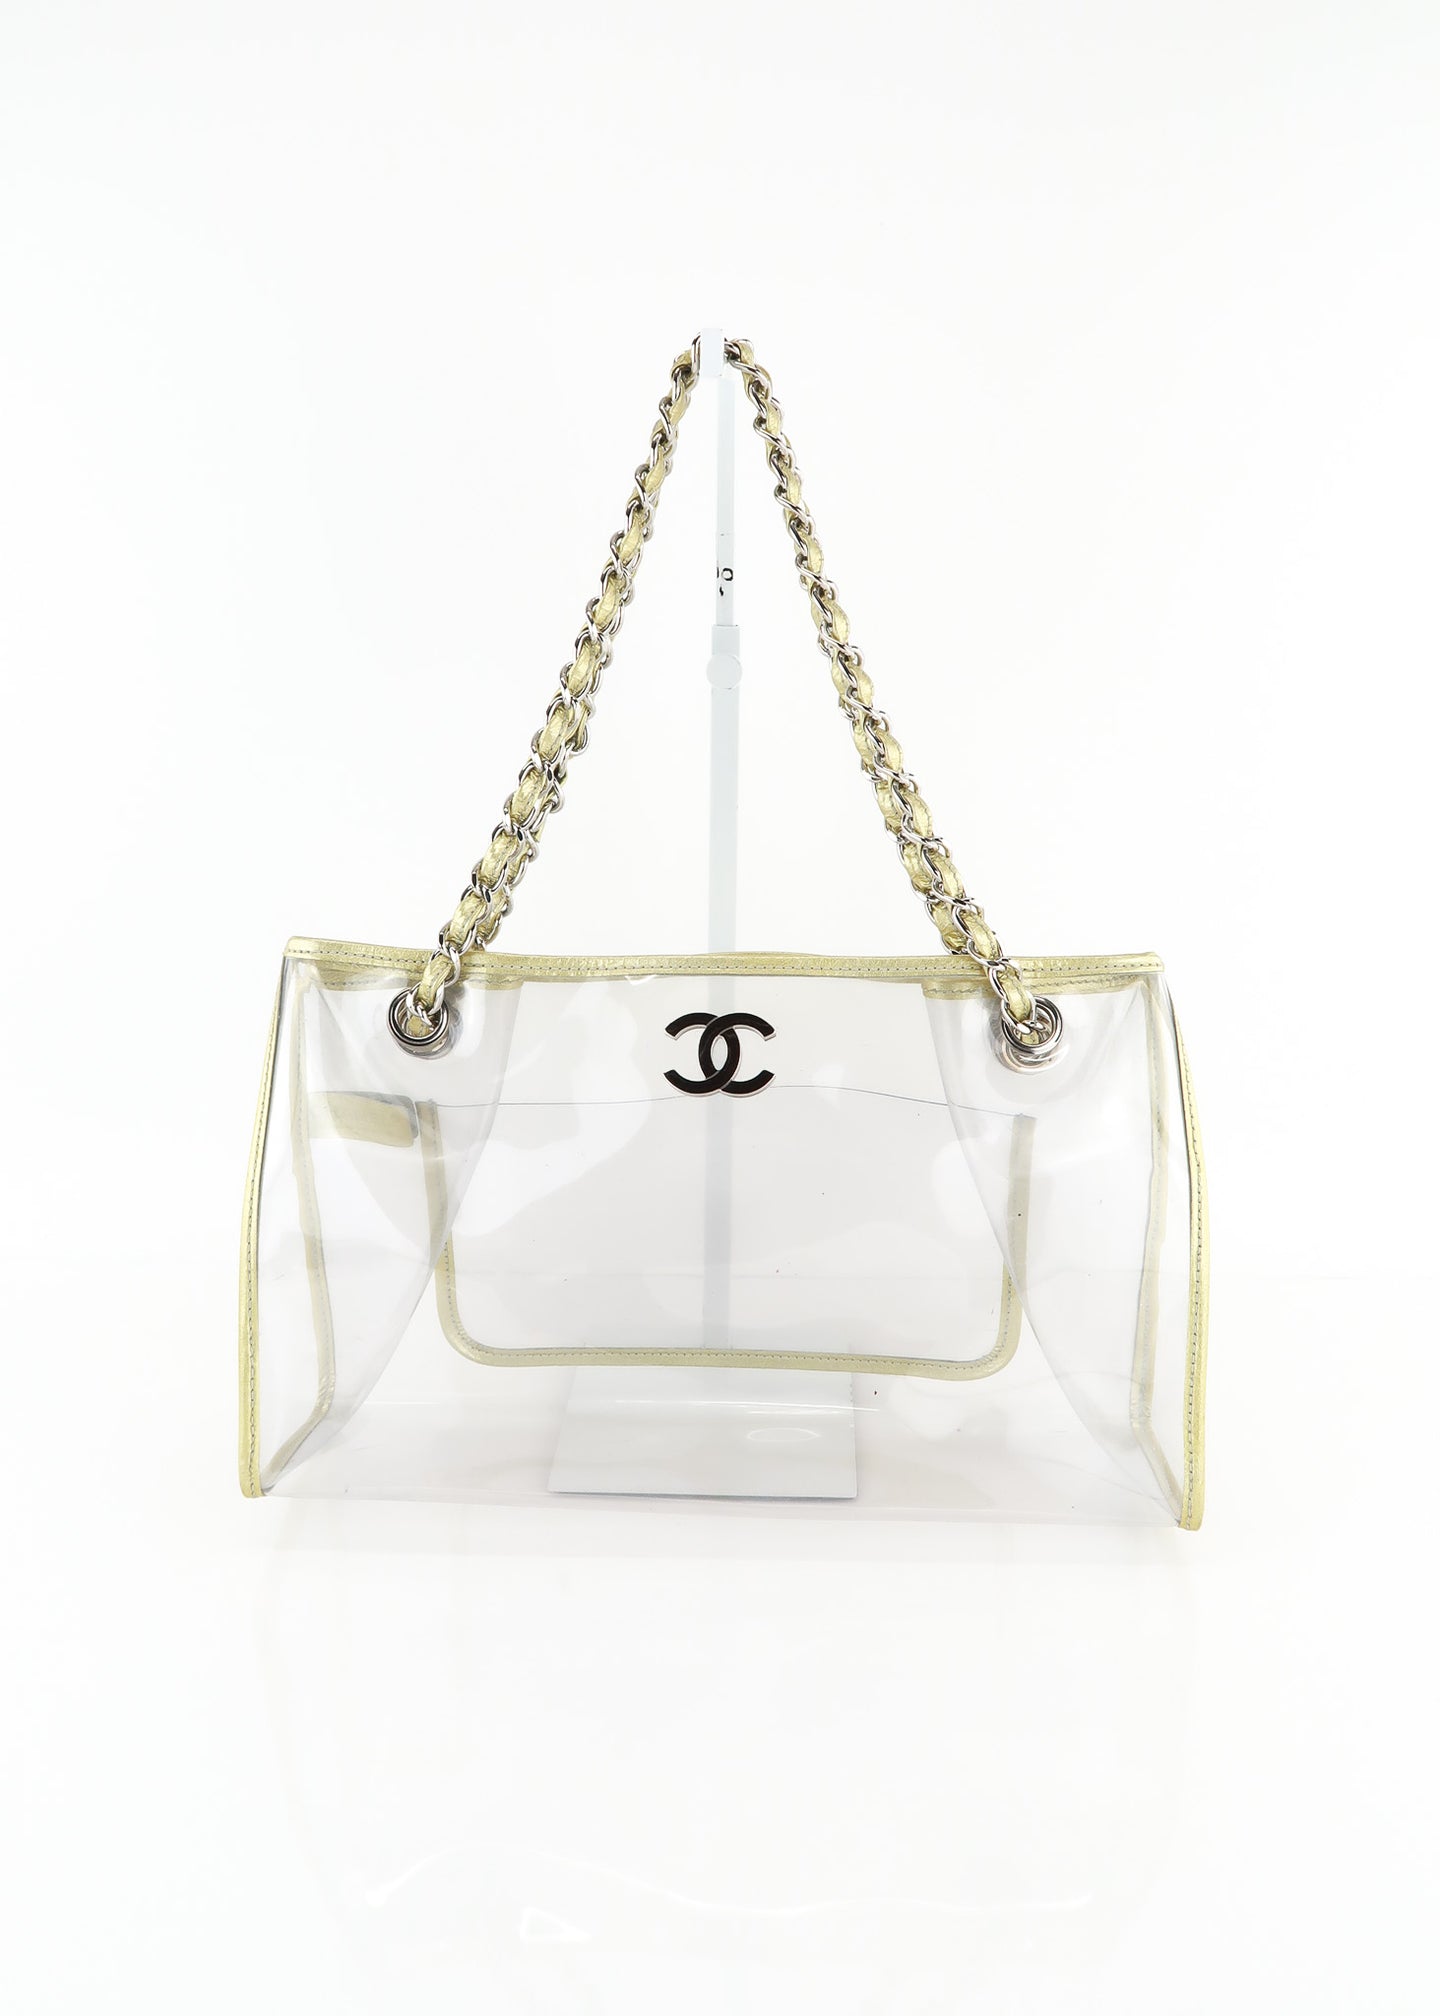 Auth CHANEL Transparent Tote Bag Vintage From Japan